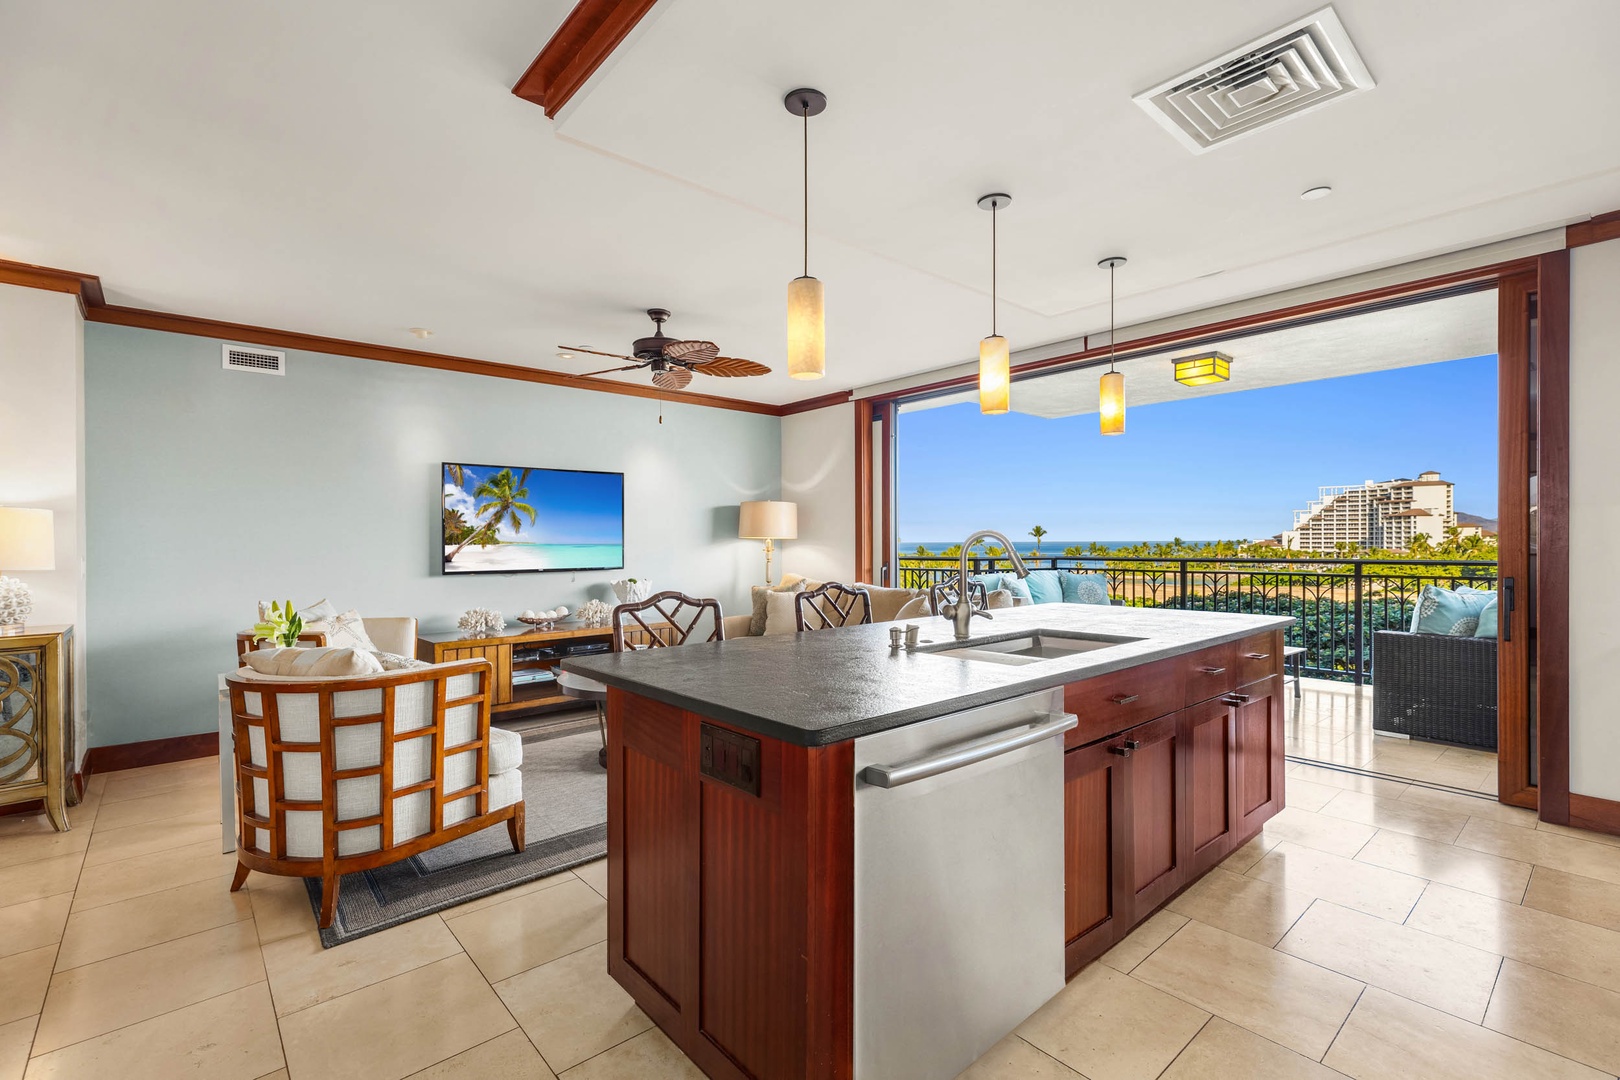 Kapolei Vacation Rentals, Ko Olina Beach Villa B604 - Flow effortlessly from the kitchen, to living area, and to the sunlit patio.